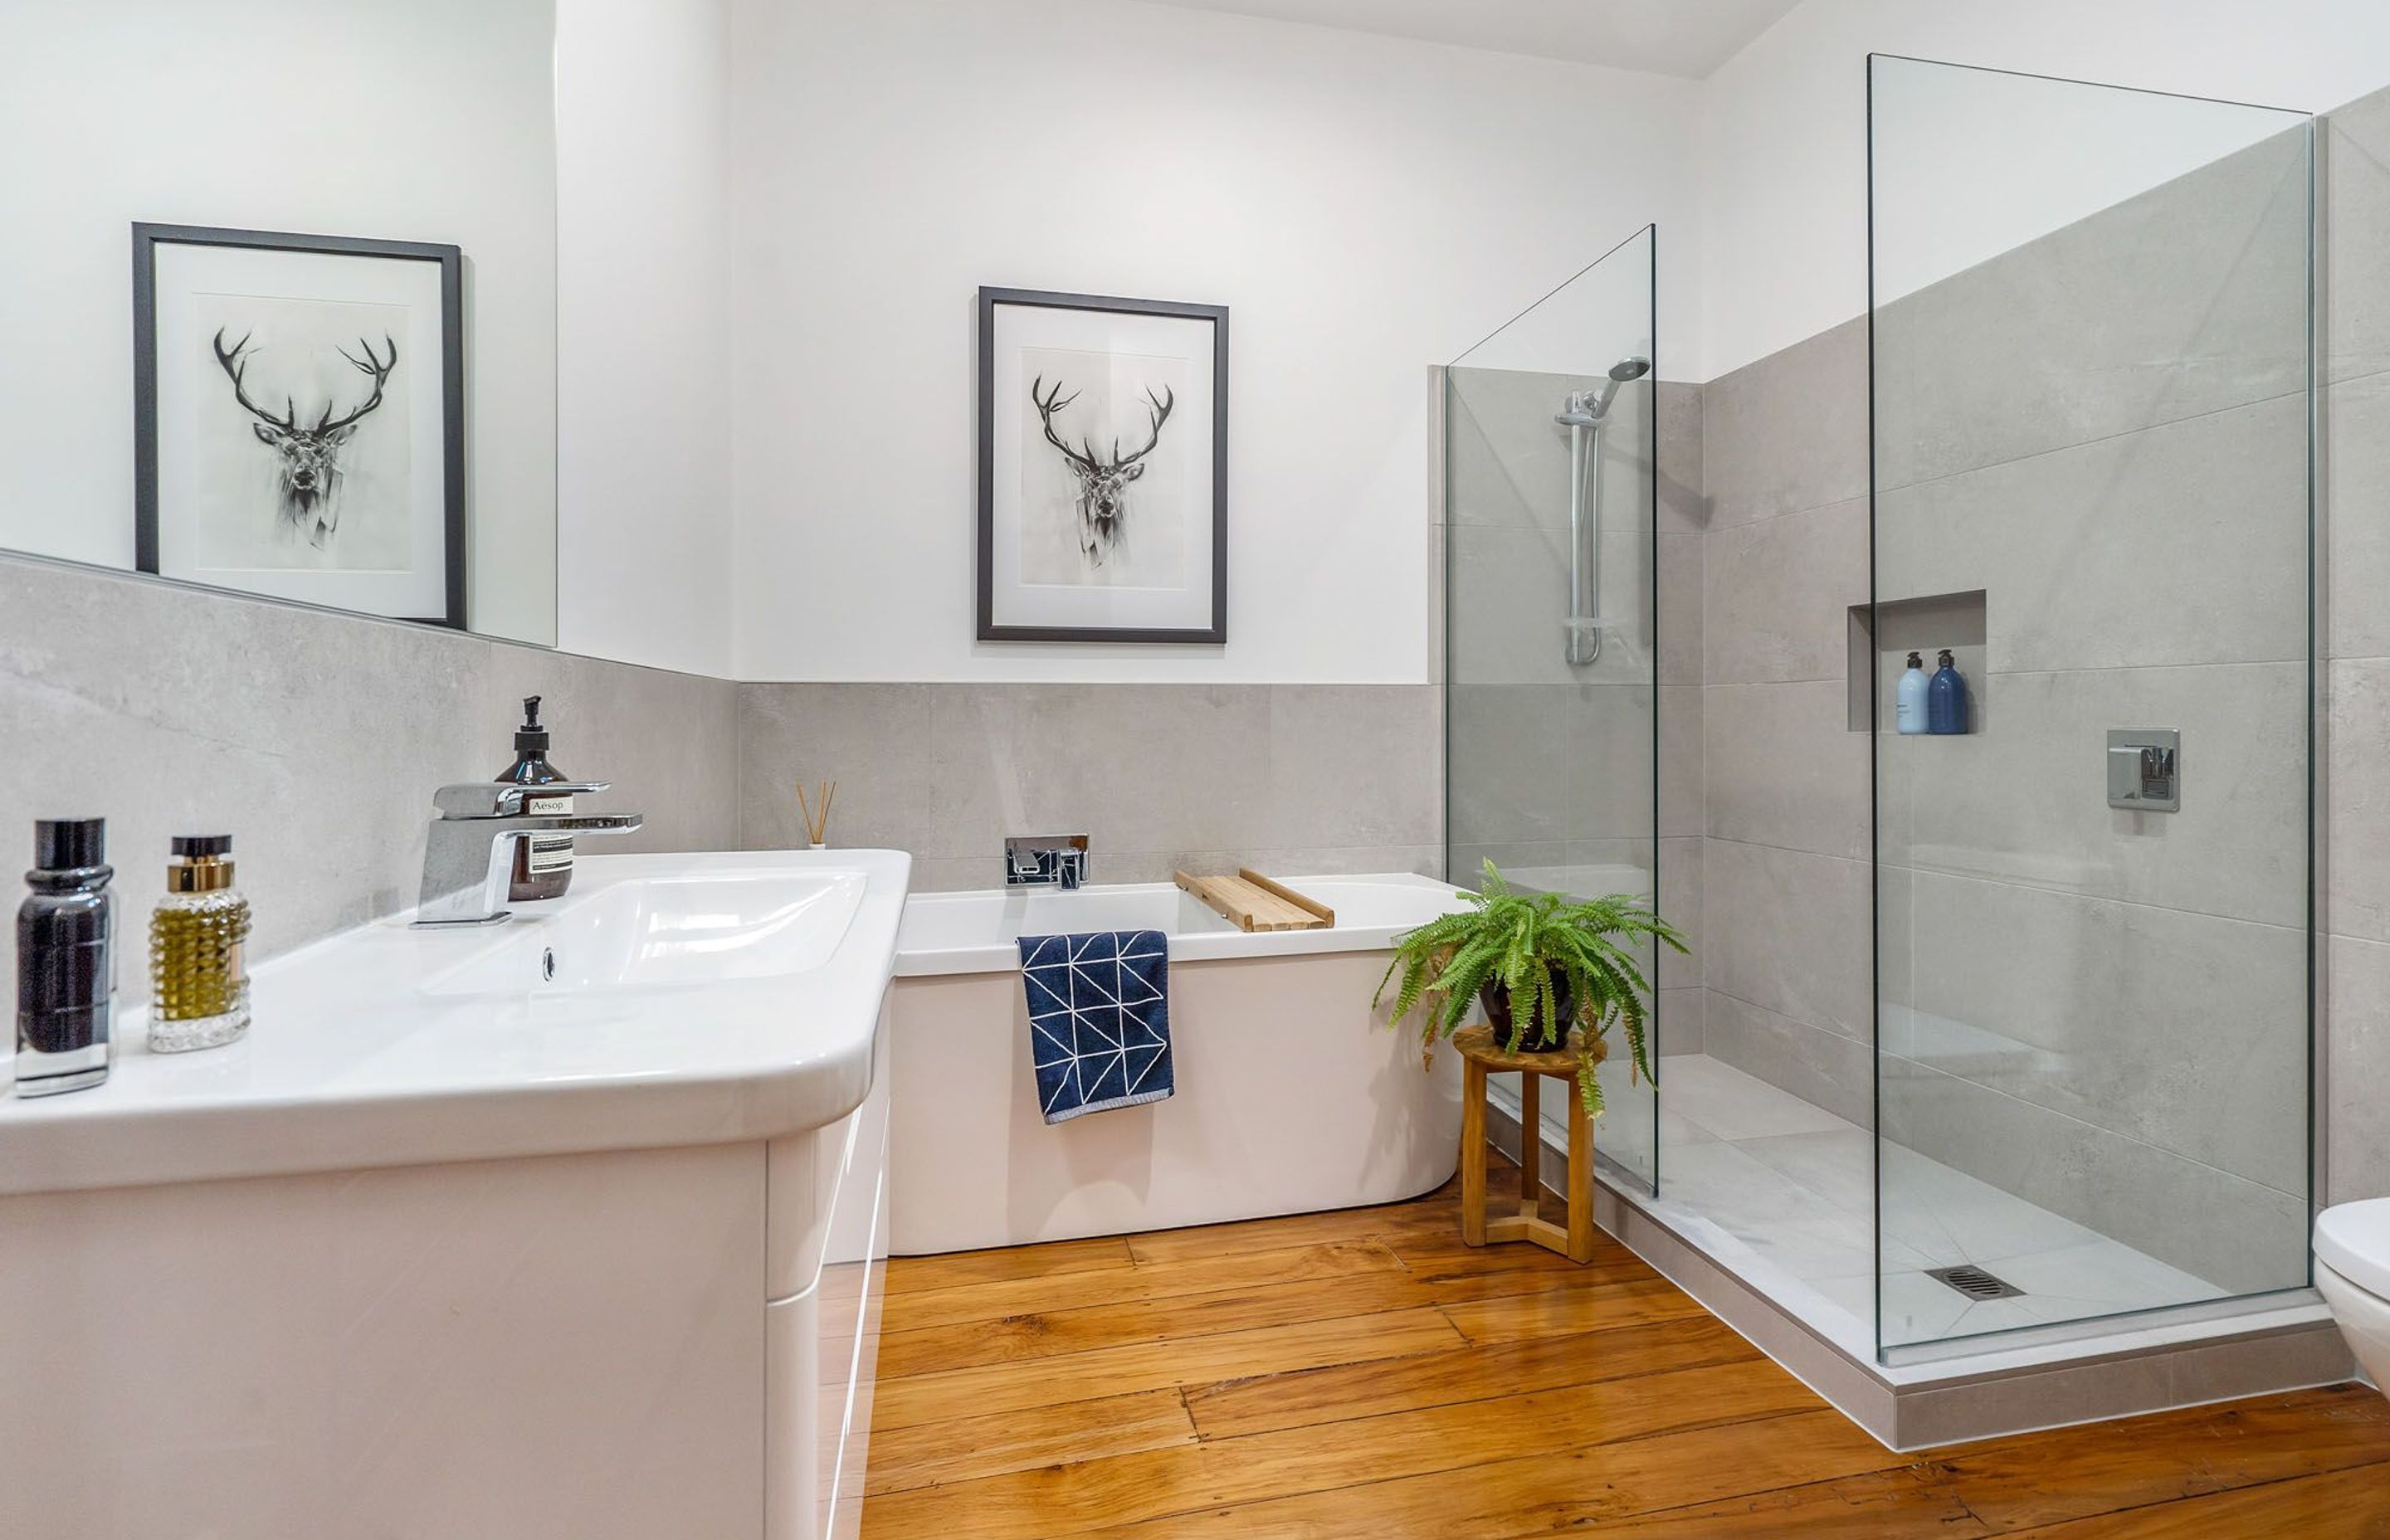 The feel in the refurbished main bathroom is very much one of graceful charm meets modern edge and reflects the home's nod to its roots while servicing modern living.